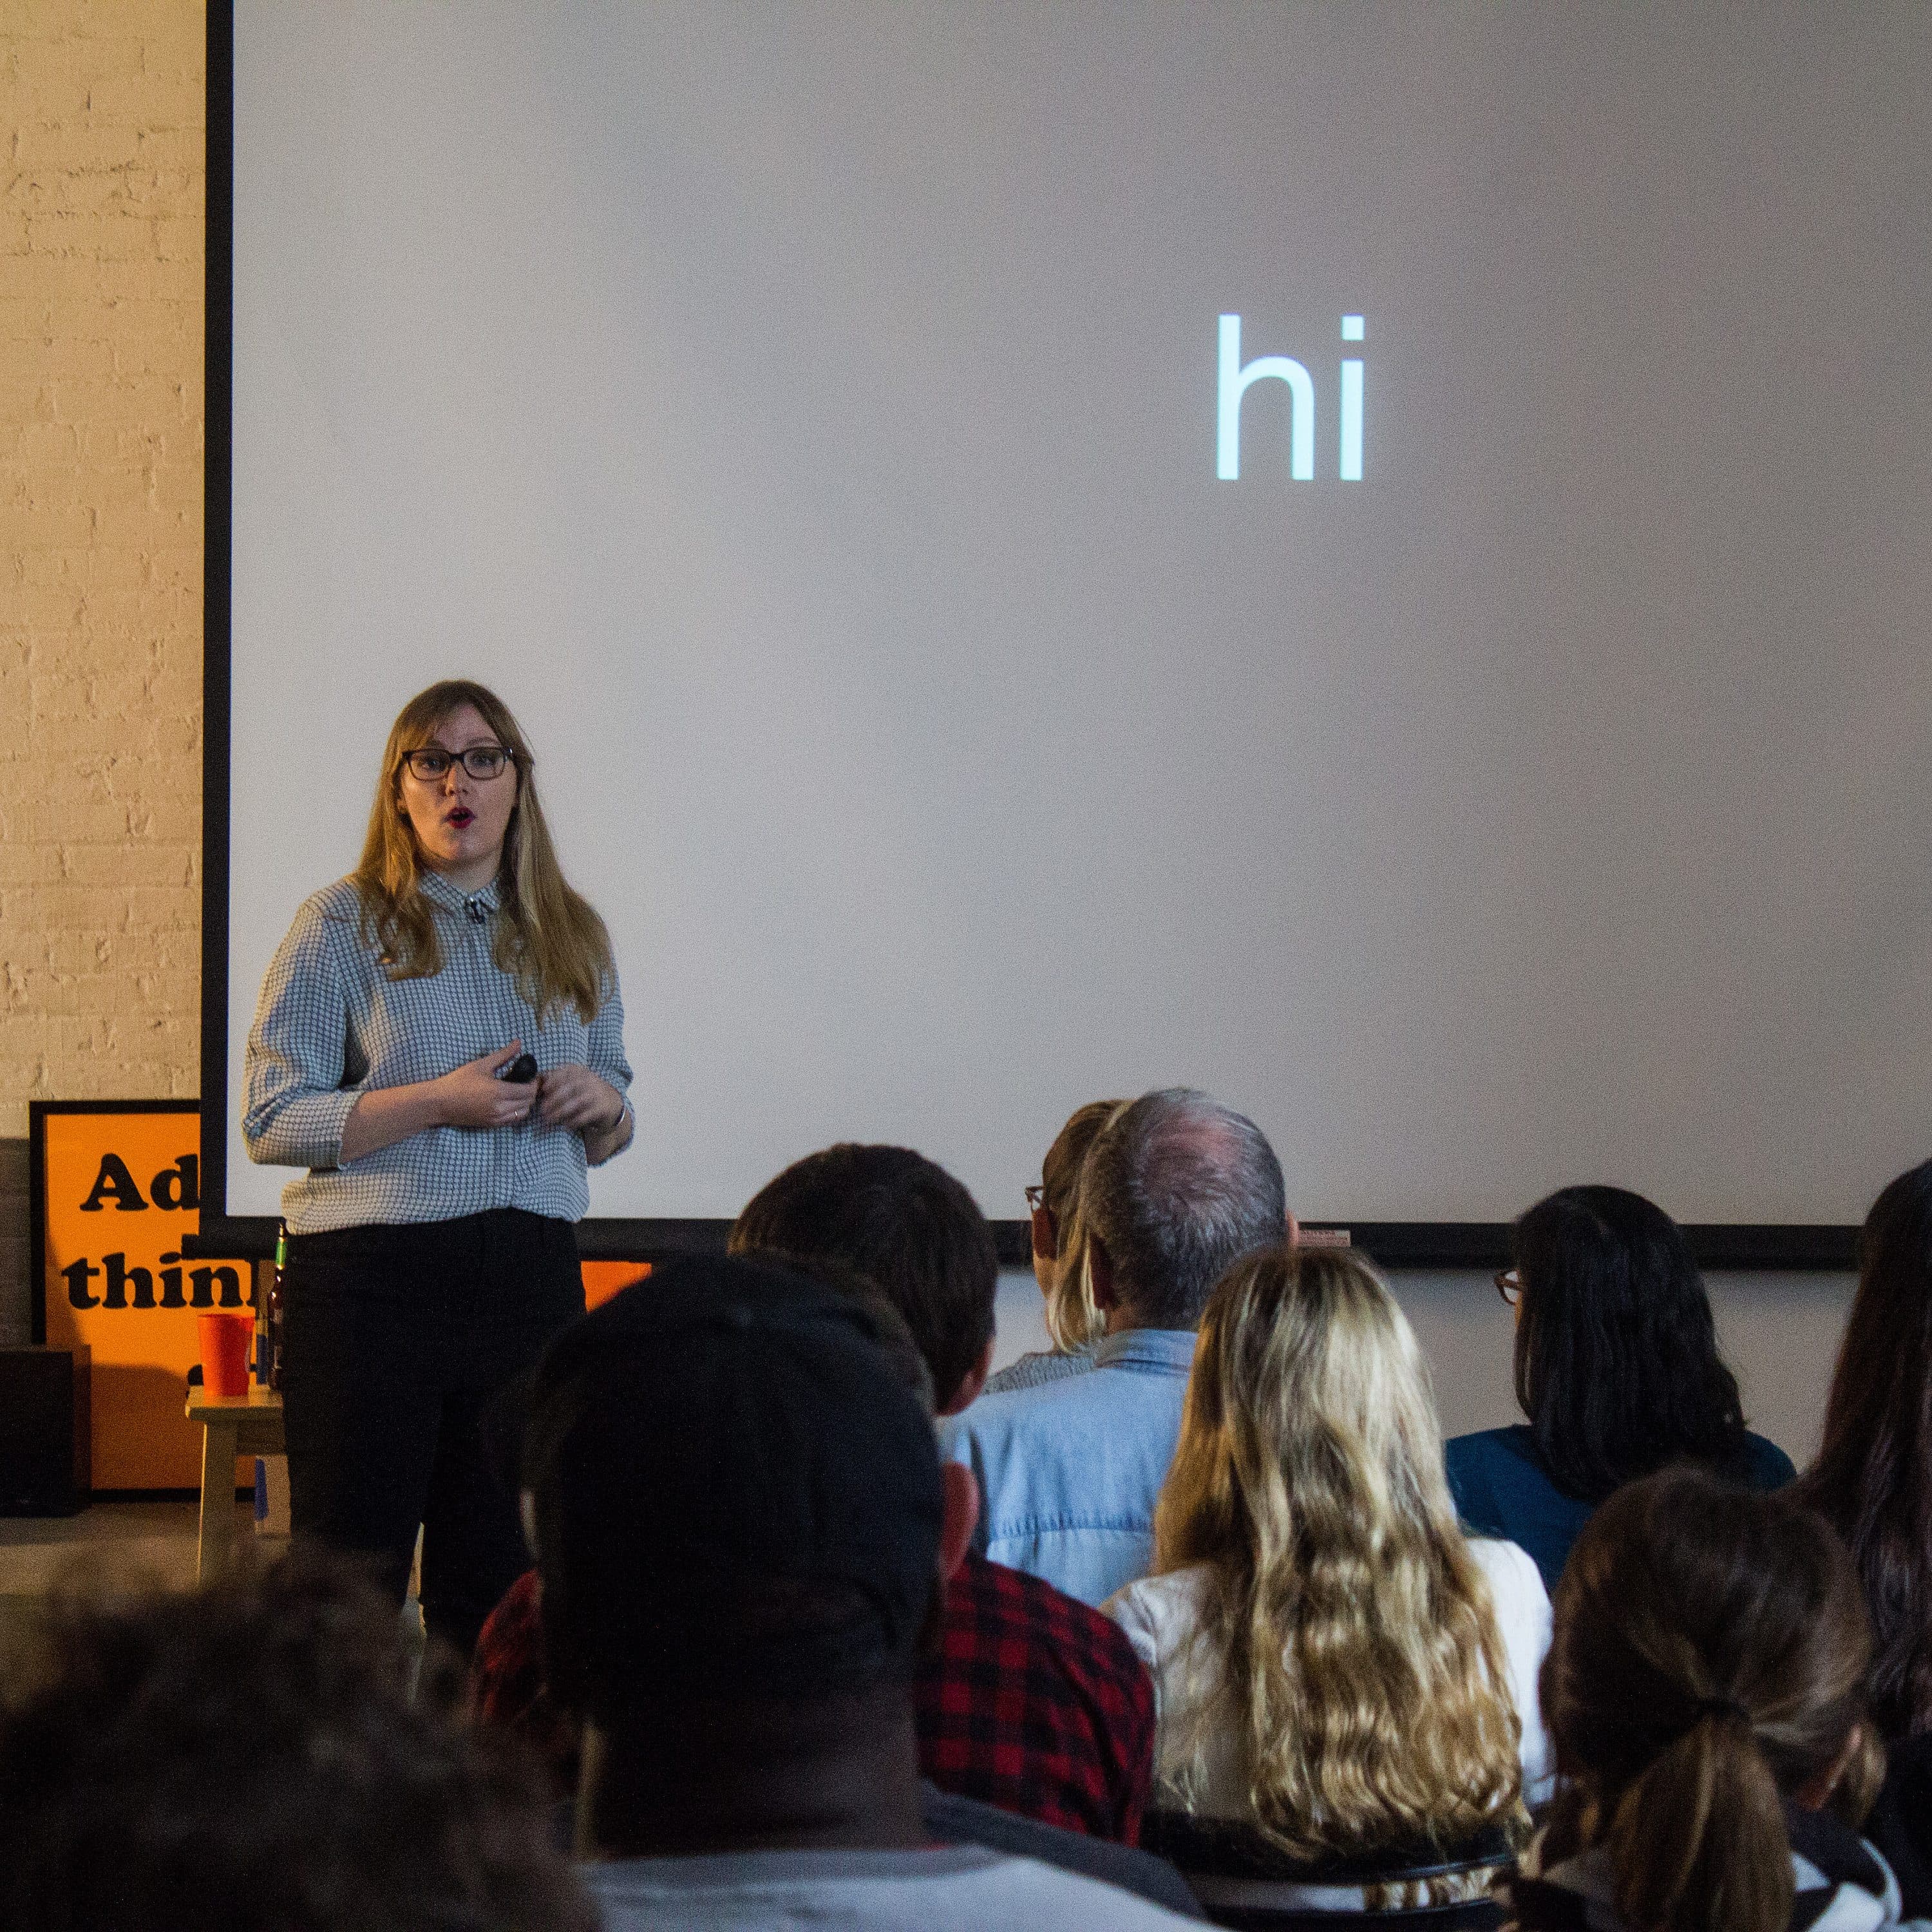 A woman stands in front of an audience, giving a presentation. The screen behind her displays the word "hi" in large, white letters. The setting appears to be an indoor venue with a relaxed, informal atmosphere. The audience is seated and attentively listening.